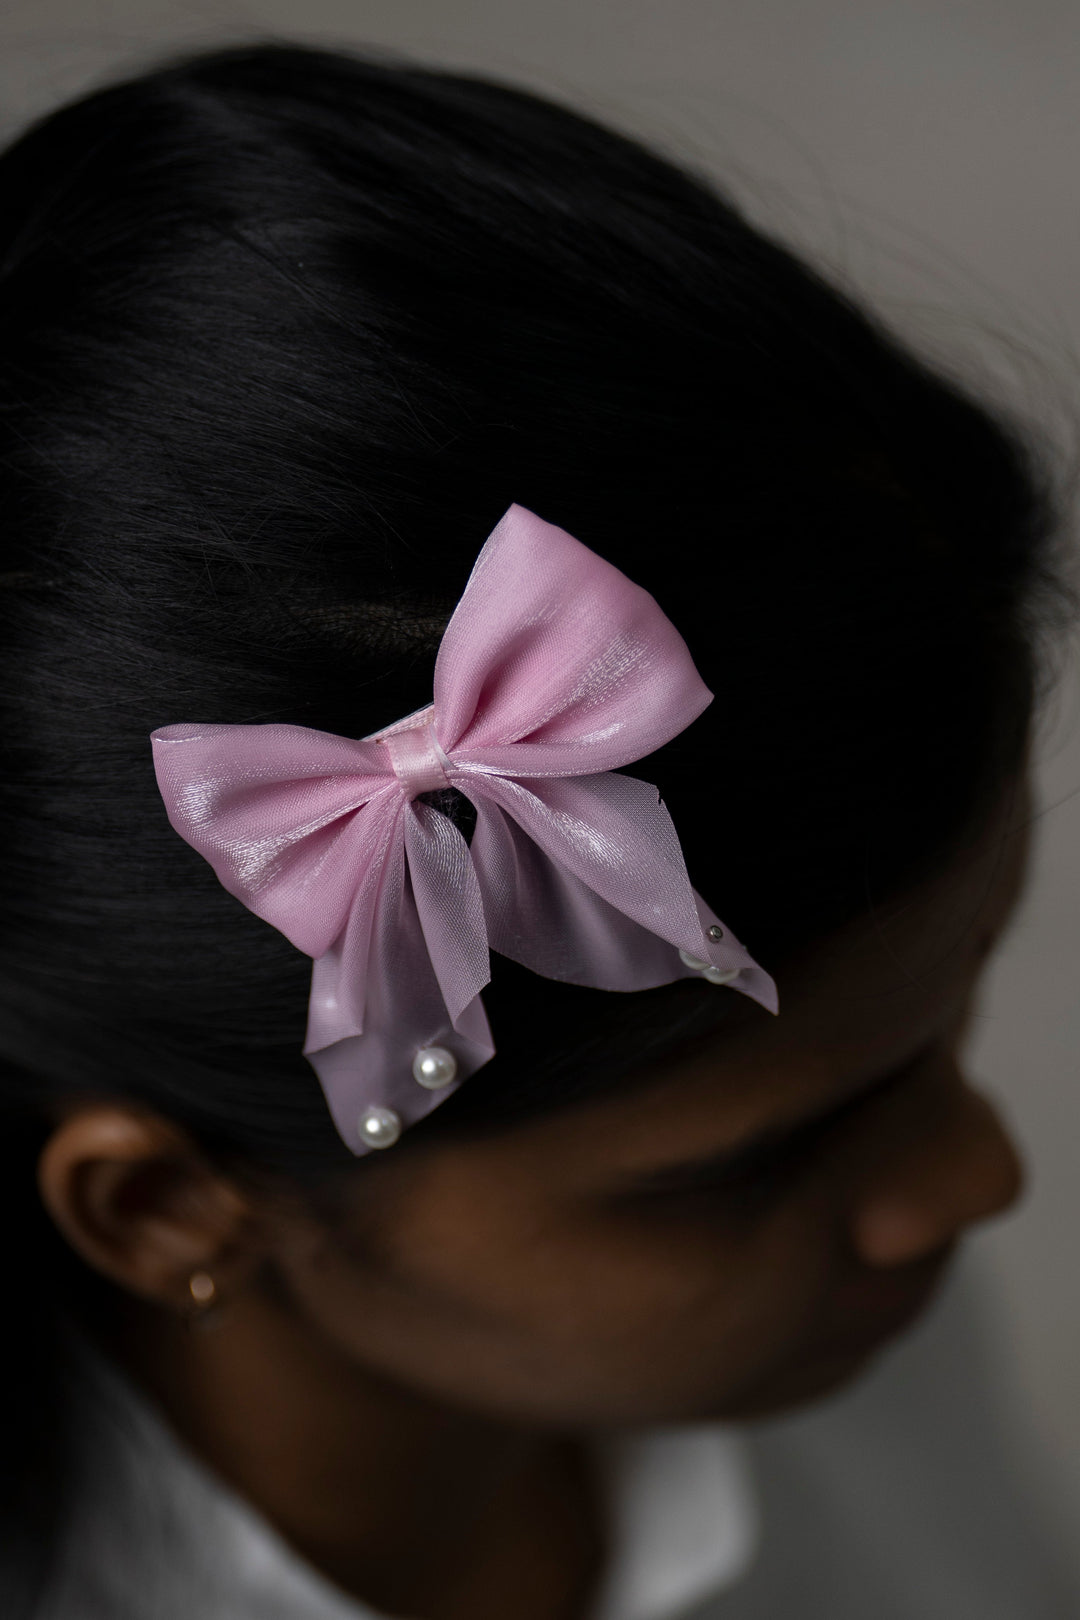 The Nesavu Hair Clip Pearl Accent Soft Pink Satin Hair Bow for a Touch of Feminine Grace Nesavu Pink JHCL76C Light Pink Satin Bow Hair Clip with Pearls | Elegant Hair Accessory for All Ages | The Nesavu